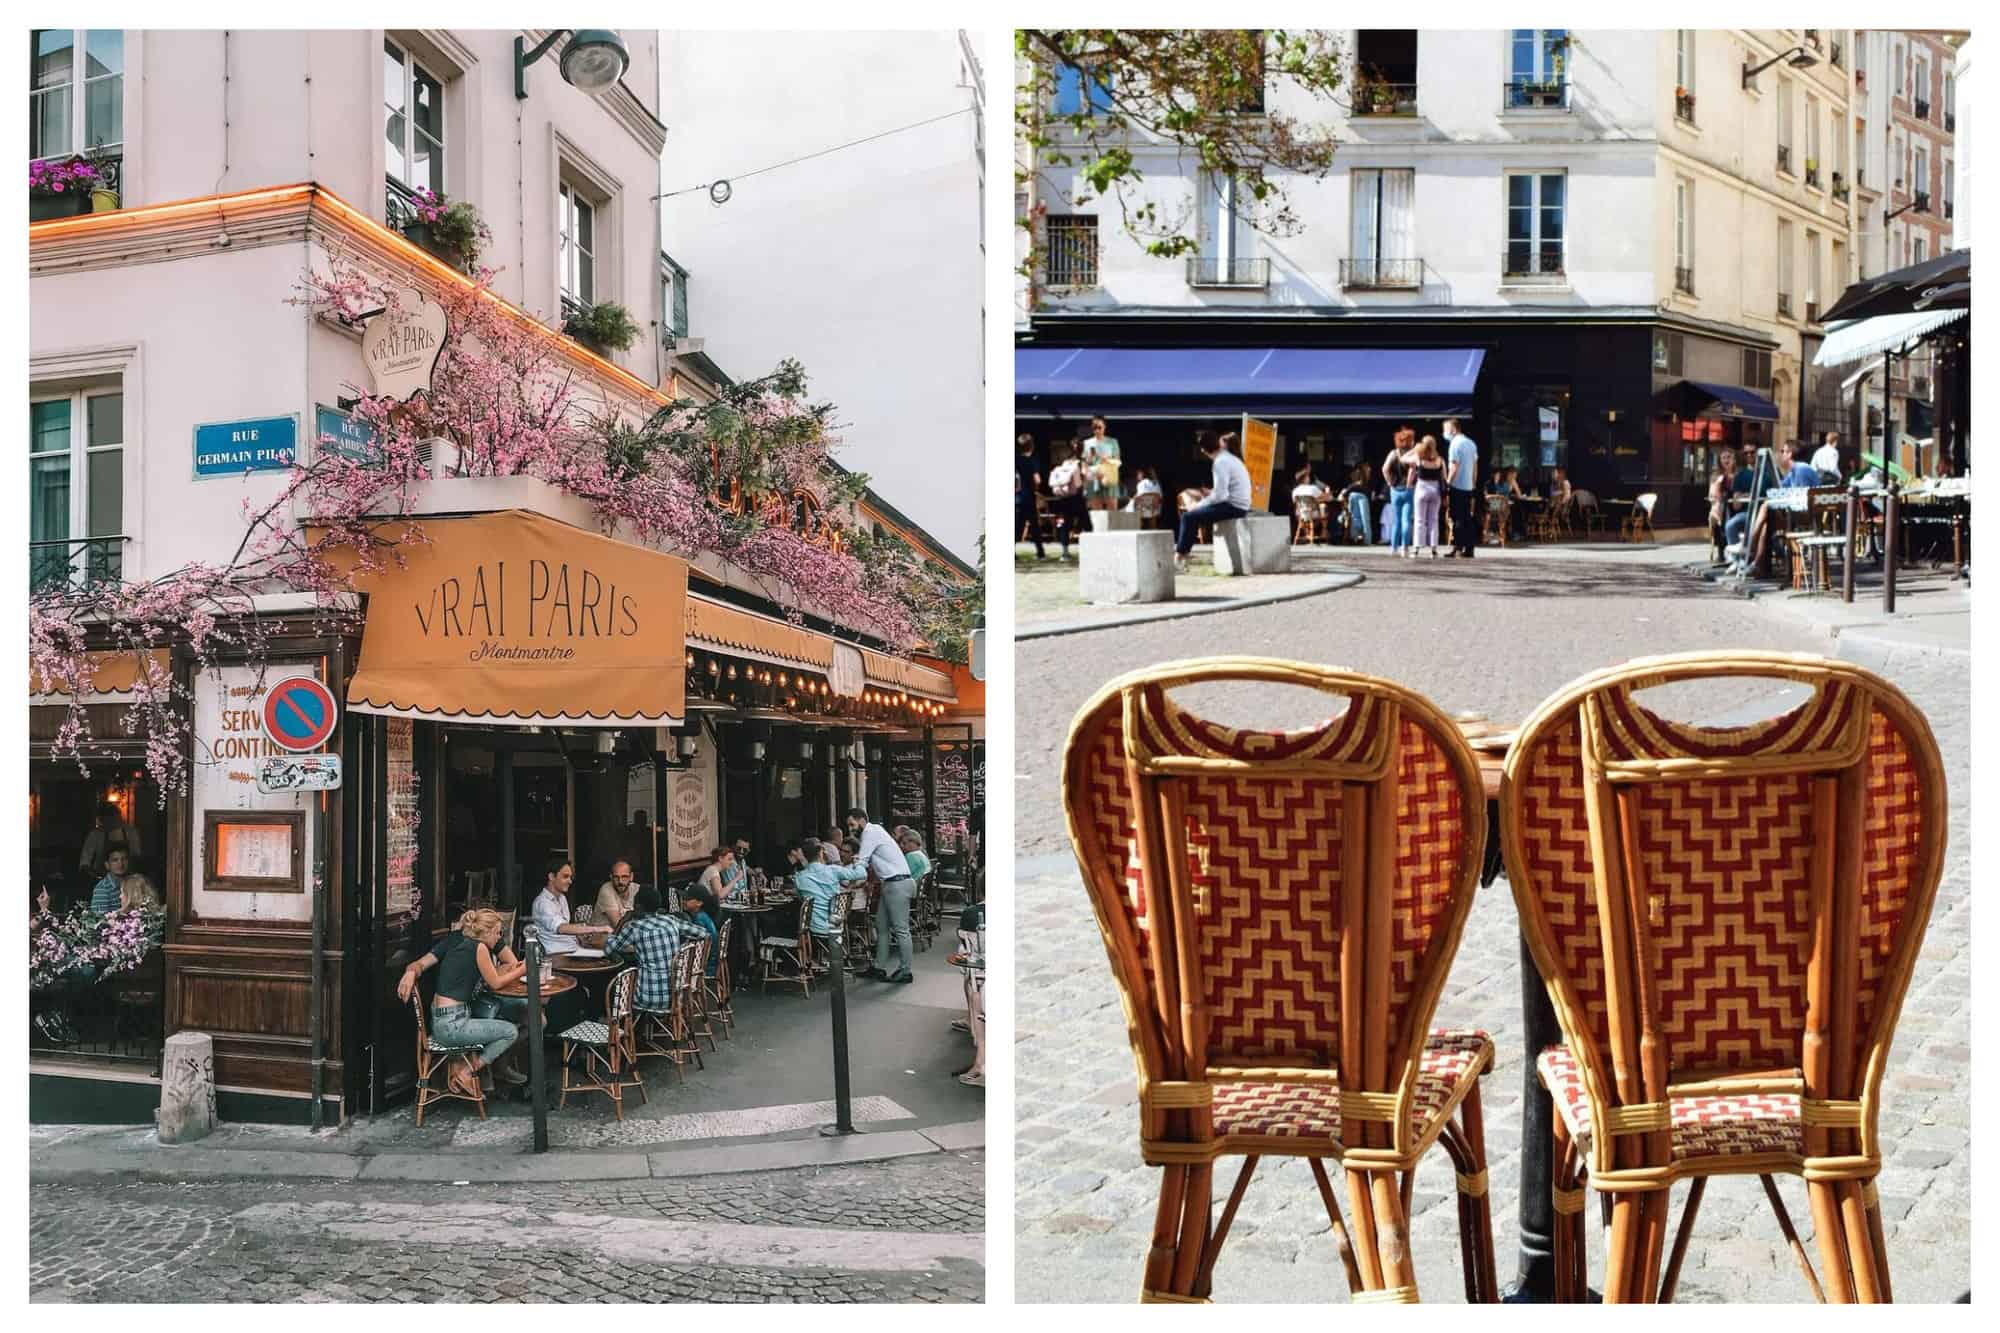 Left: A picture of the iconic Vrai Paris restaurant in Montmartre. Right: Two typical Parisian terrace chairs and a table are pictured.